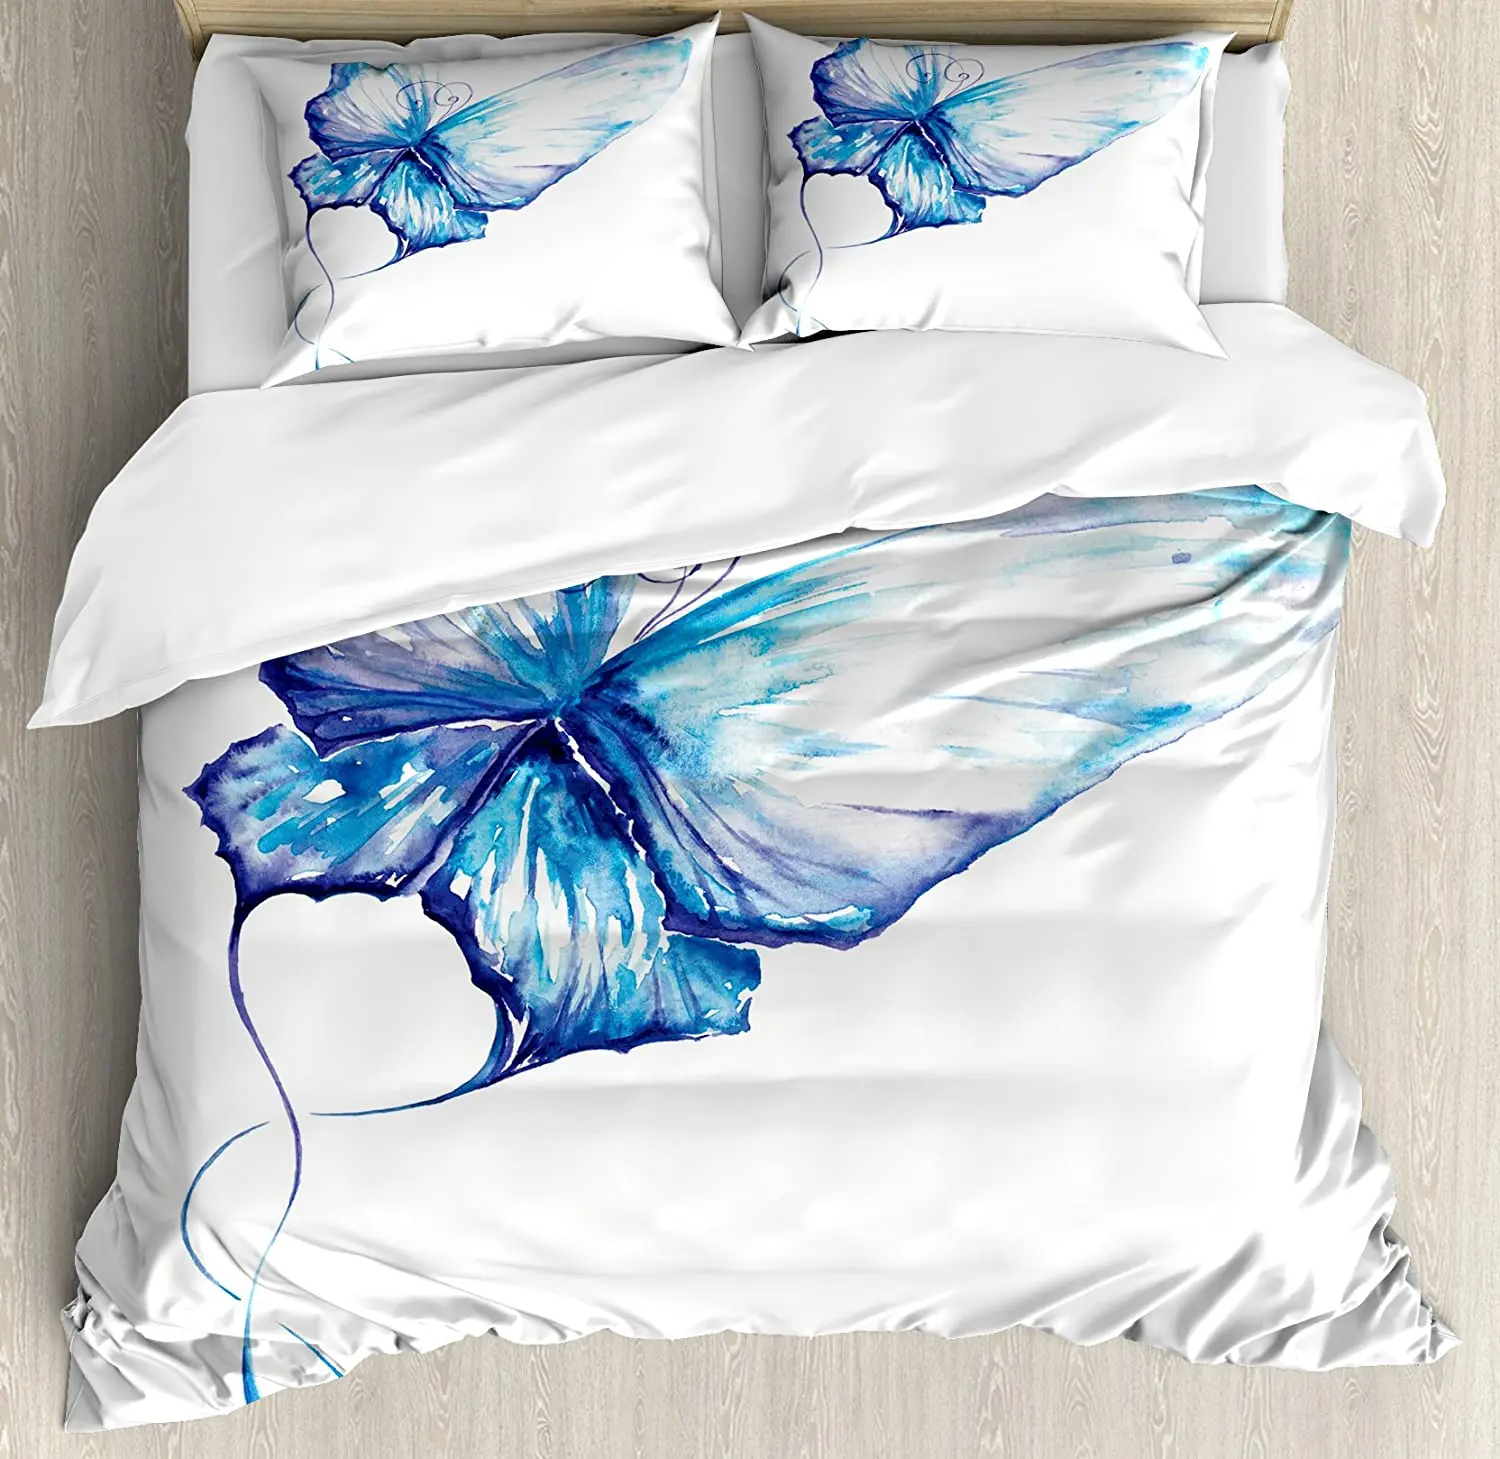 

Watercolor Bedding Set For Home Bed Hand Drawn Style Blue Butterfly Nature Inspired Art Brush Strokes in Soft Colors Duvet Cover